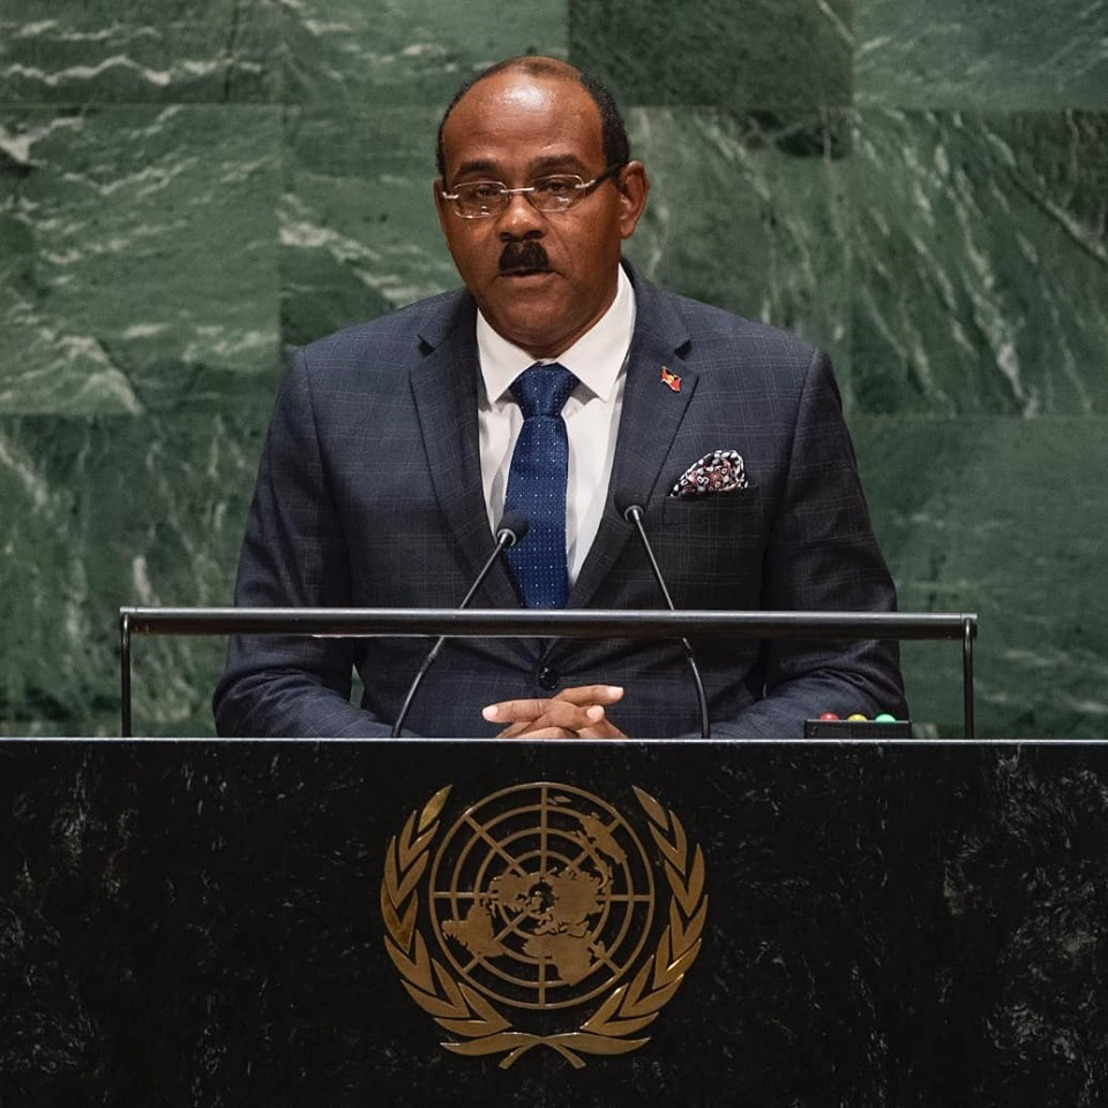 OECS Chairman The Hon. Gaston Browne, Prime Minister of Antigua and Barbuda, addresses the general debate of the 74th Session of the UN General Assembly